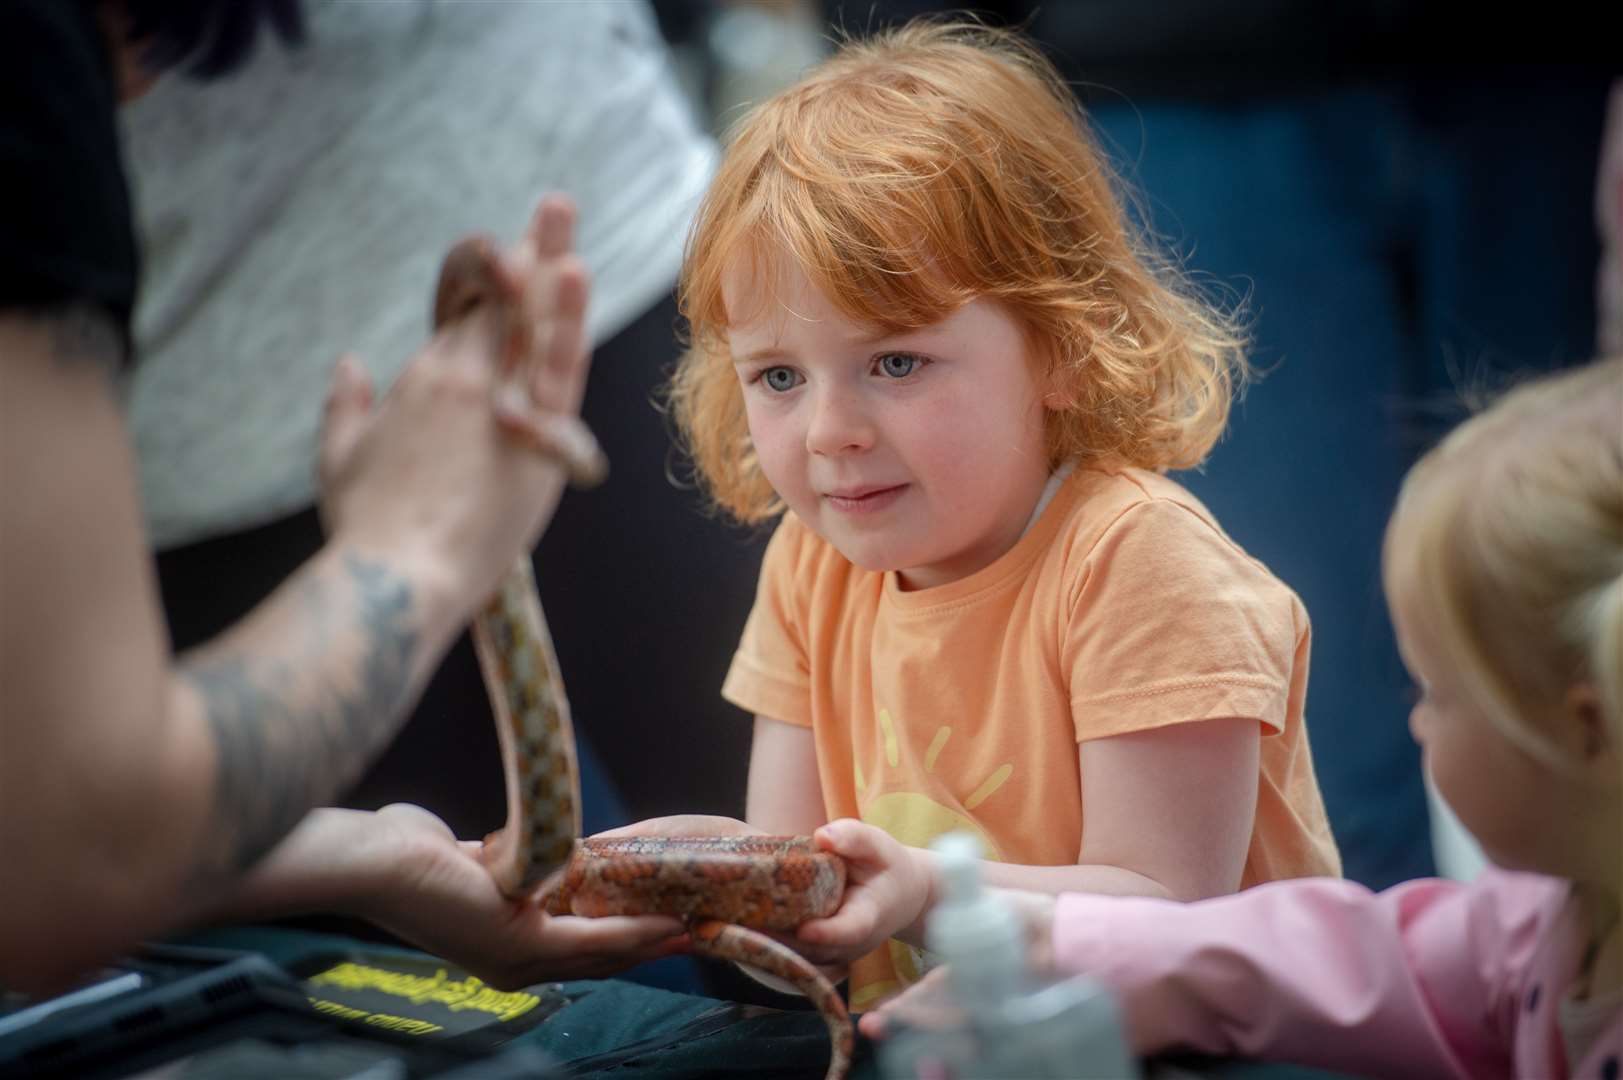 A youngster casts a wary eye over one of the visitors to Scottish Exotic Animal Rescue.